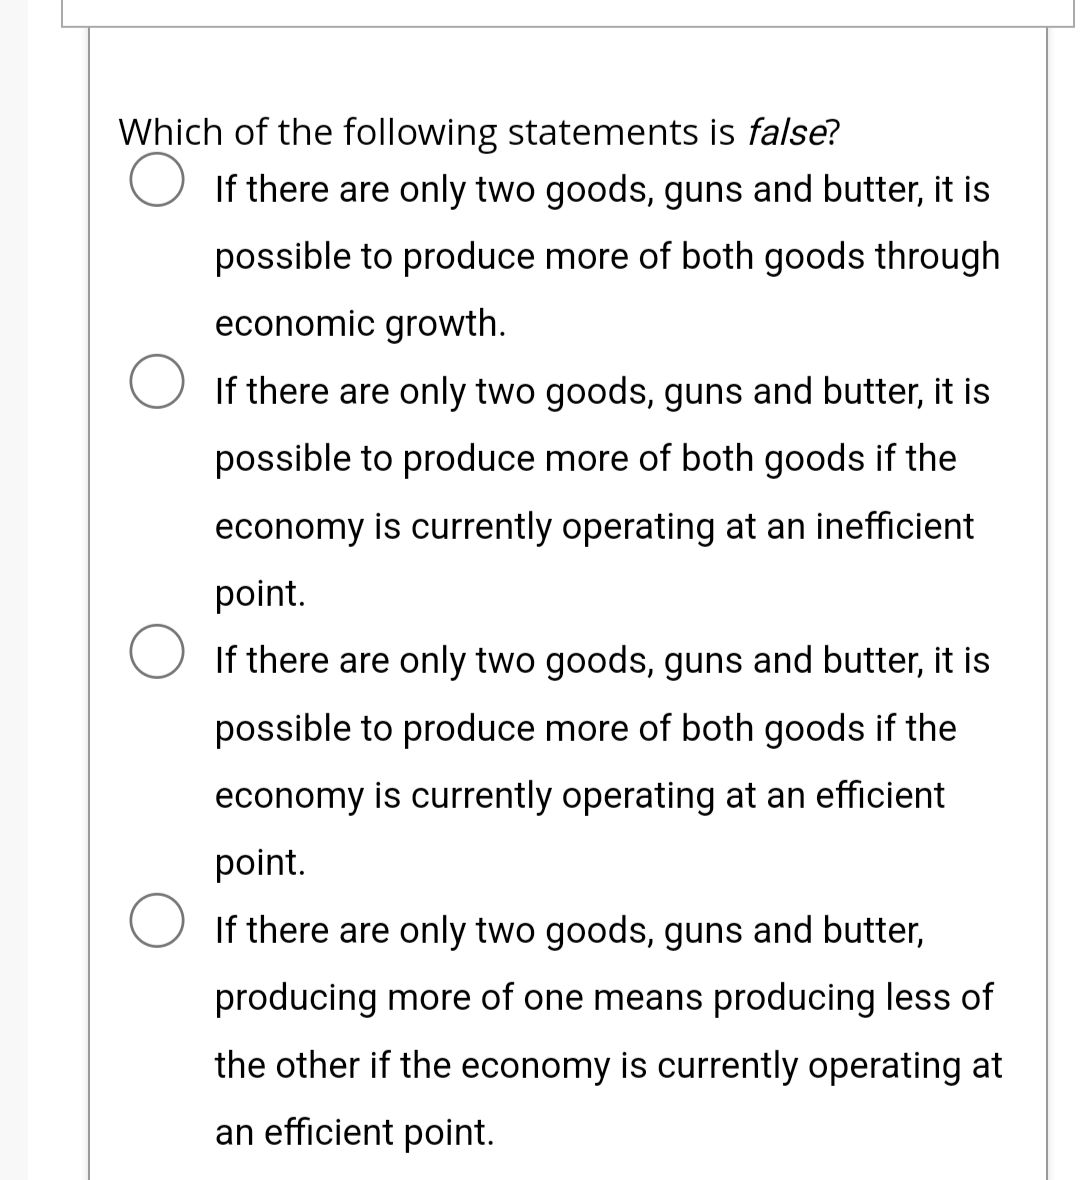 Which of the following statements is false?
○ If there are only two goods, guns and butter, it is
possible to produce more of both goods through
economic growth.
○ If there are only two goods, guns and butter, it is
possible to produce more of both goods if the
economy is currently operating at an inefficient
point.
If there are only two goods, guns and butter, it is
possible to produce more of both goods if the
economy is currently operating at an efficient
point.
If there are only two goods, guns and butter,
producing more of one means producing less of
the other if the economy is currently operating at
an efficient point.